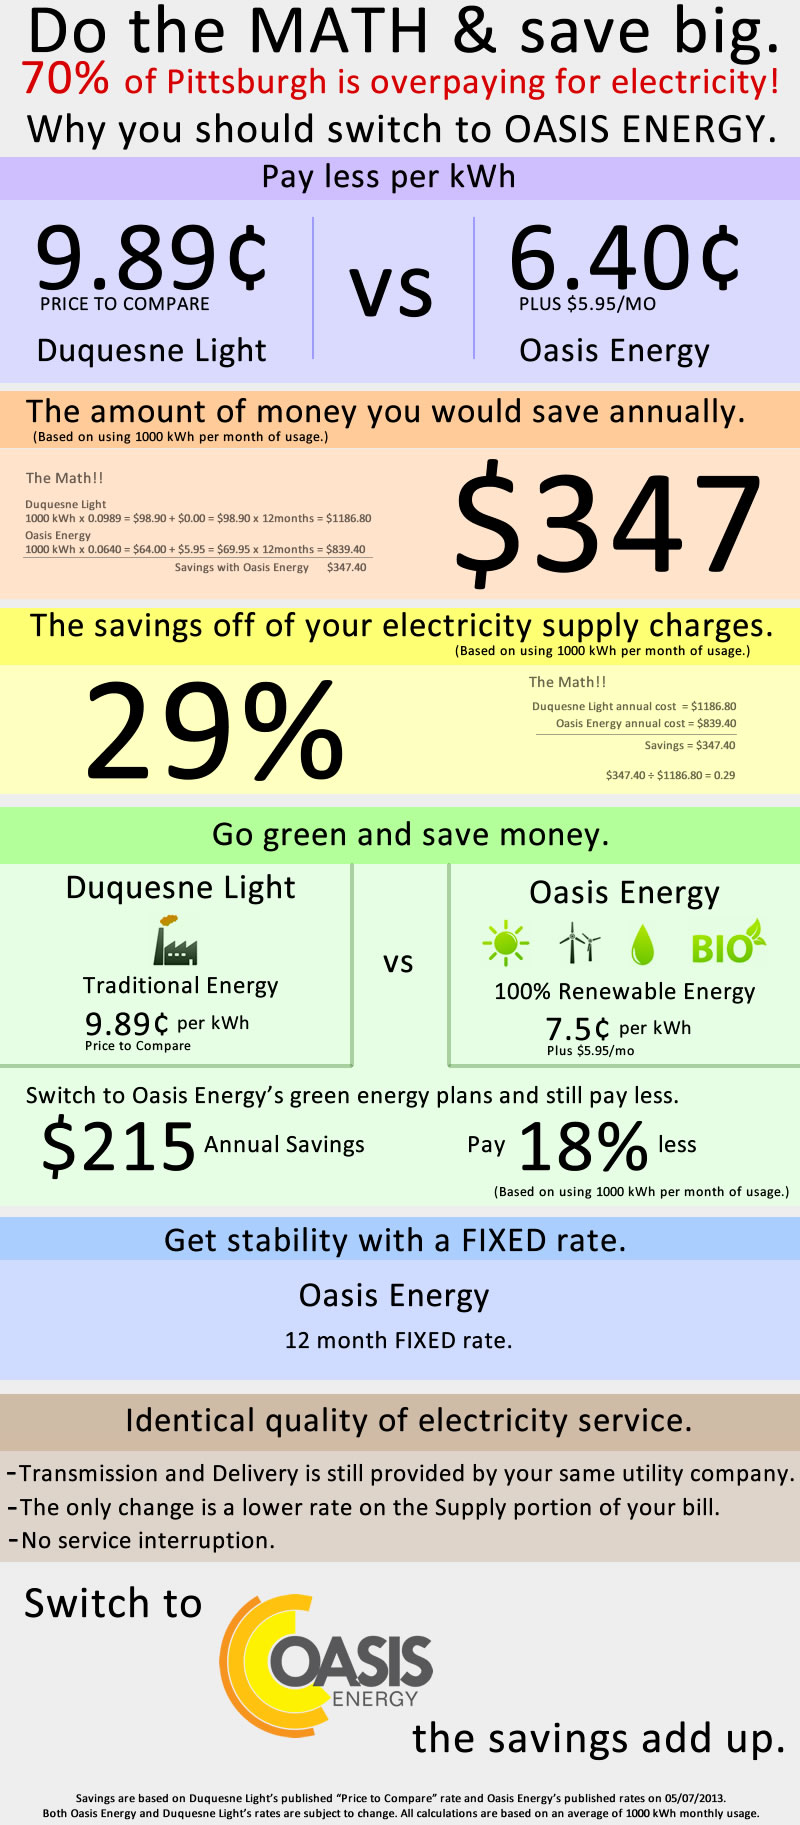 oasis-energy-makes-the-case-for-switching-away-from-duquesne-light